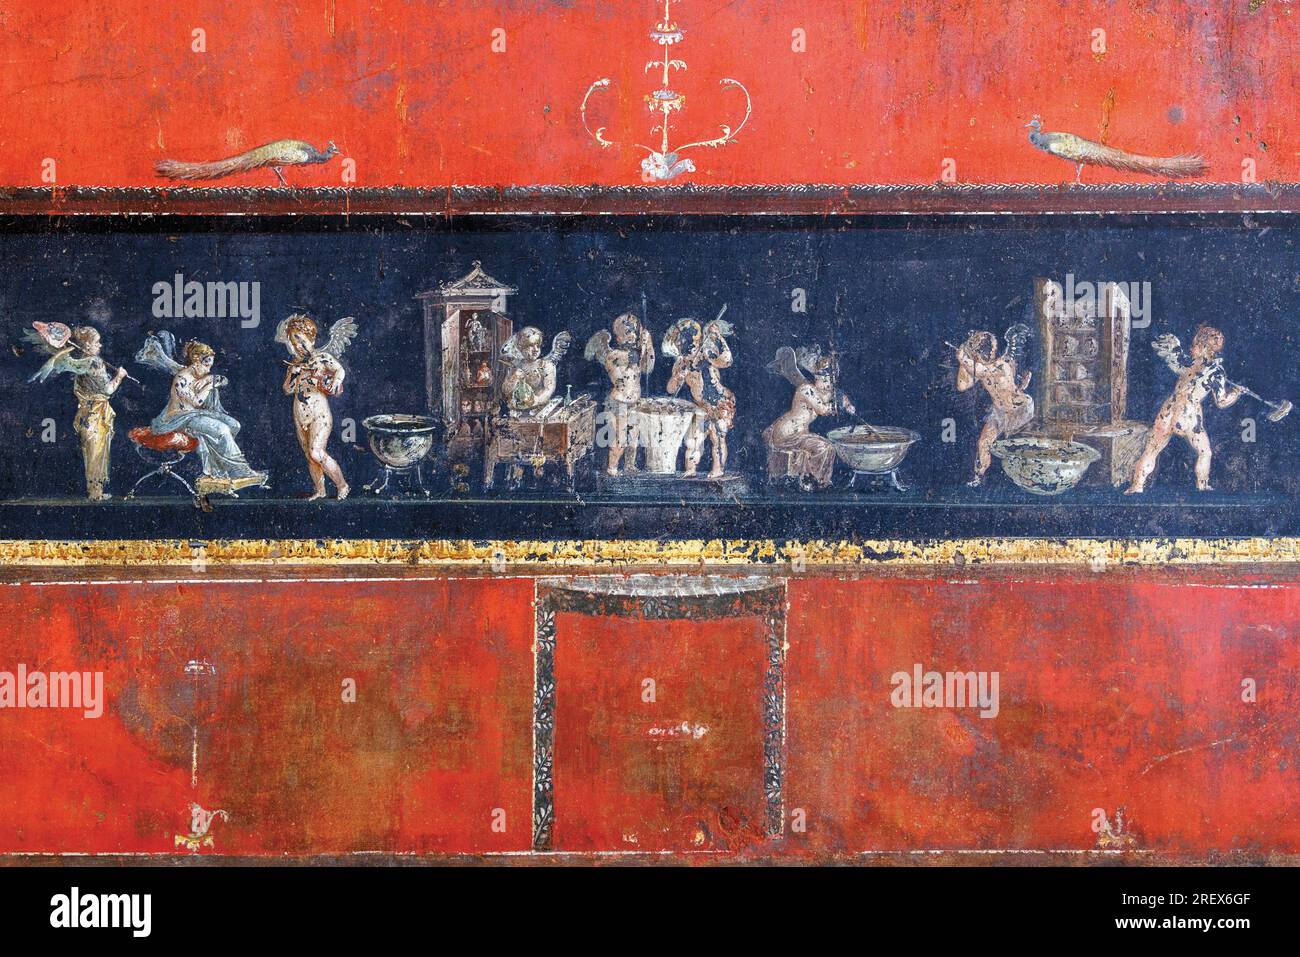 Pompeii Archaeological Site, Campania, Italy.  Cupids and Psyches preparing perfume. House of the Vettii.  Casa dei Vettii.  Pompeii, Herculaneum, and Stock Photo